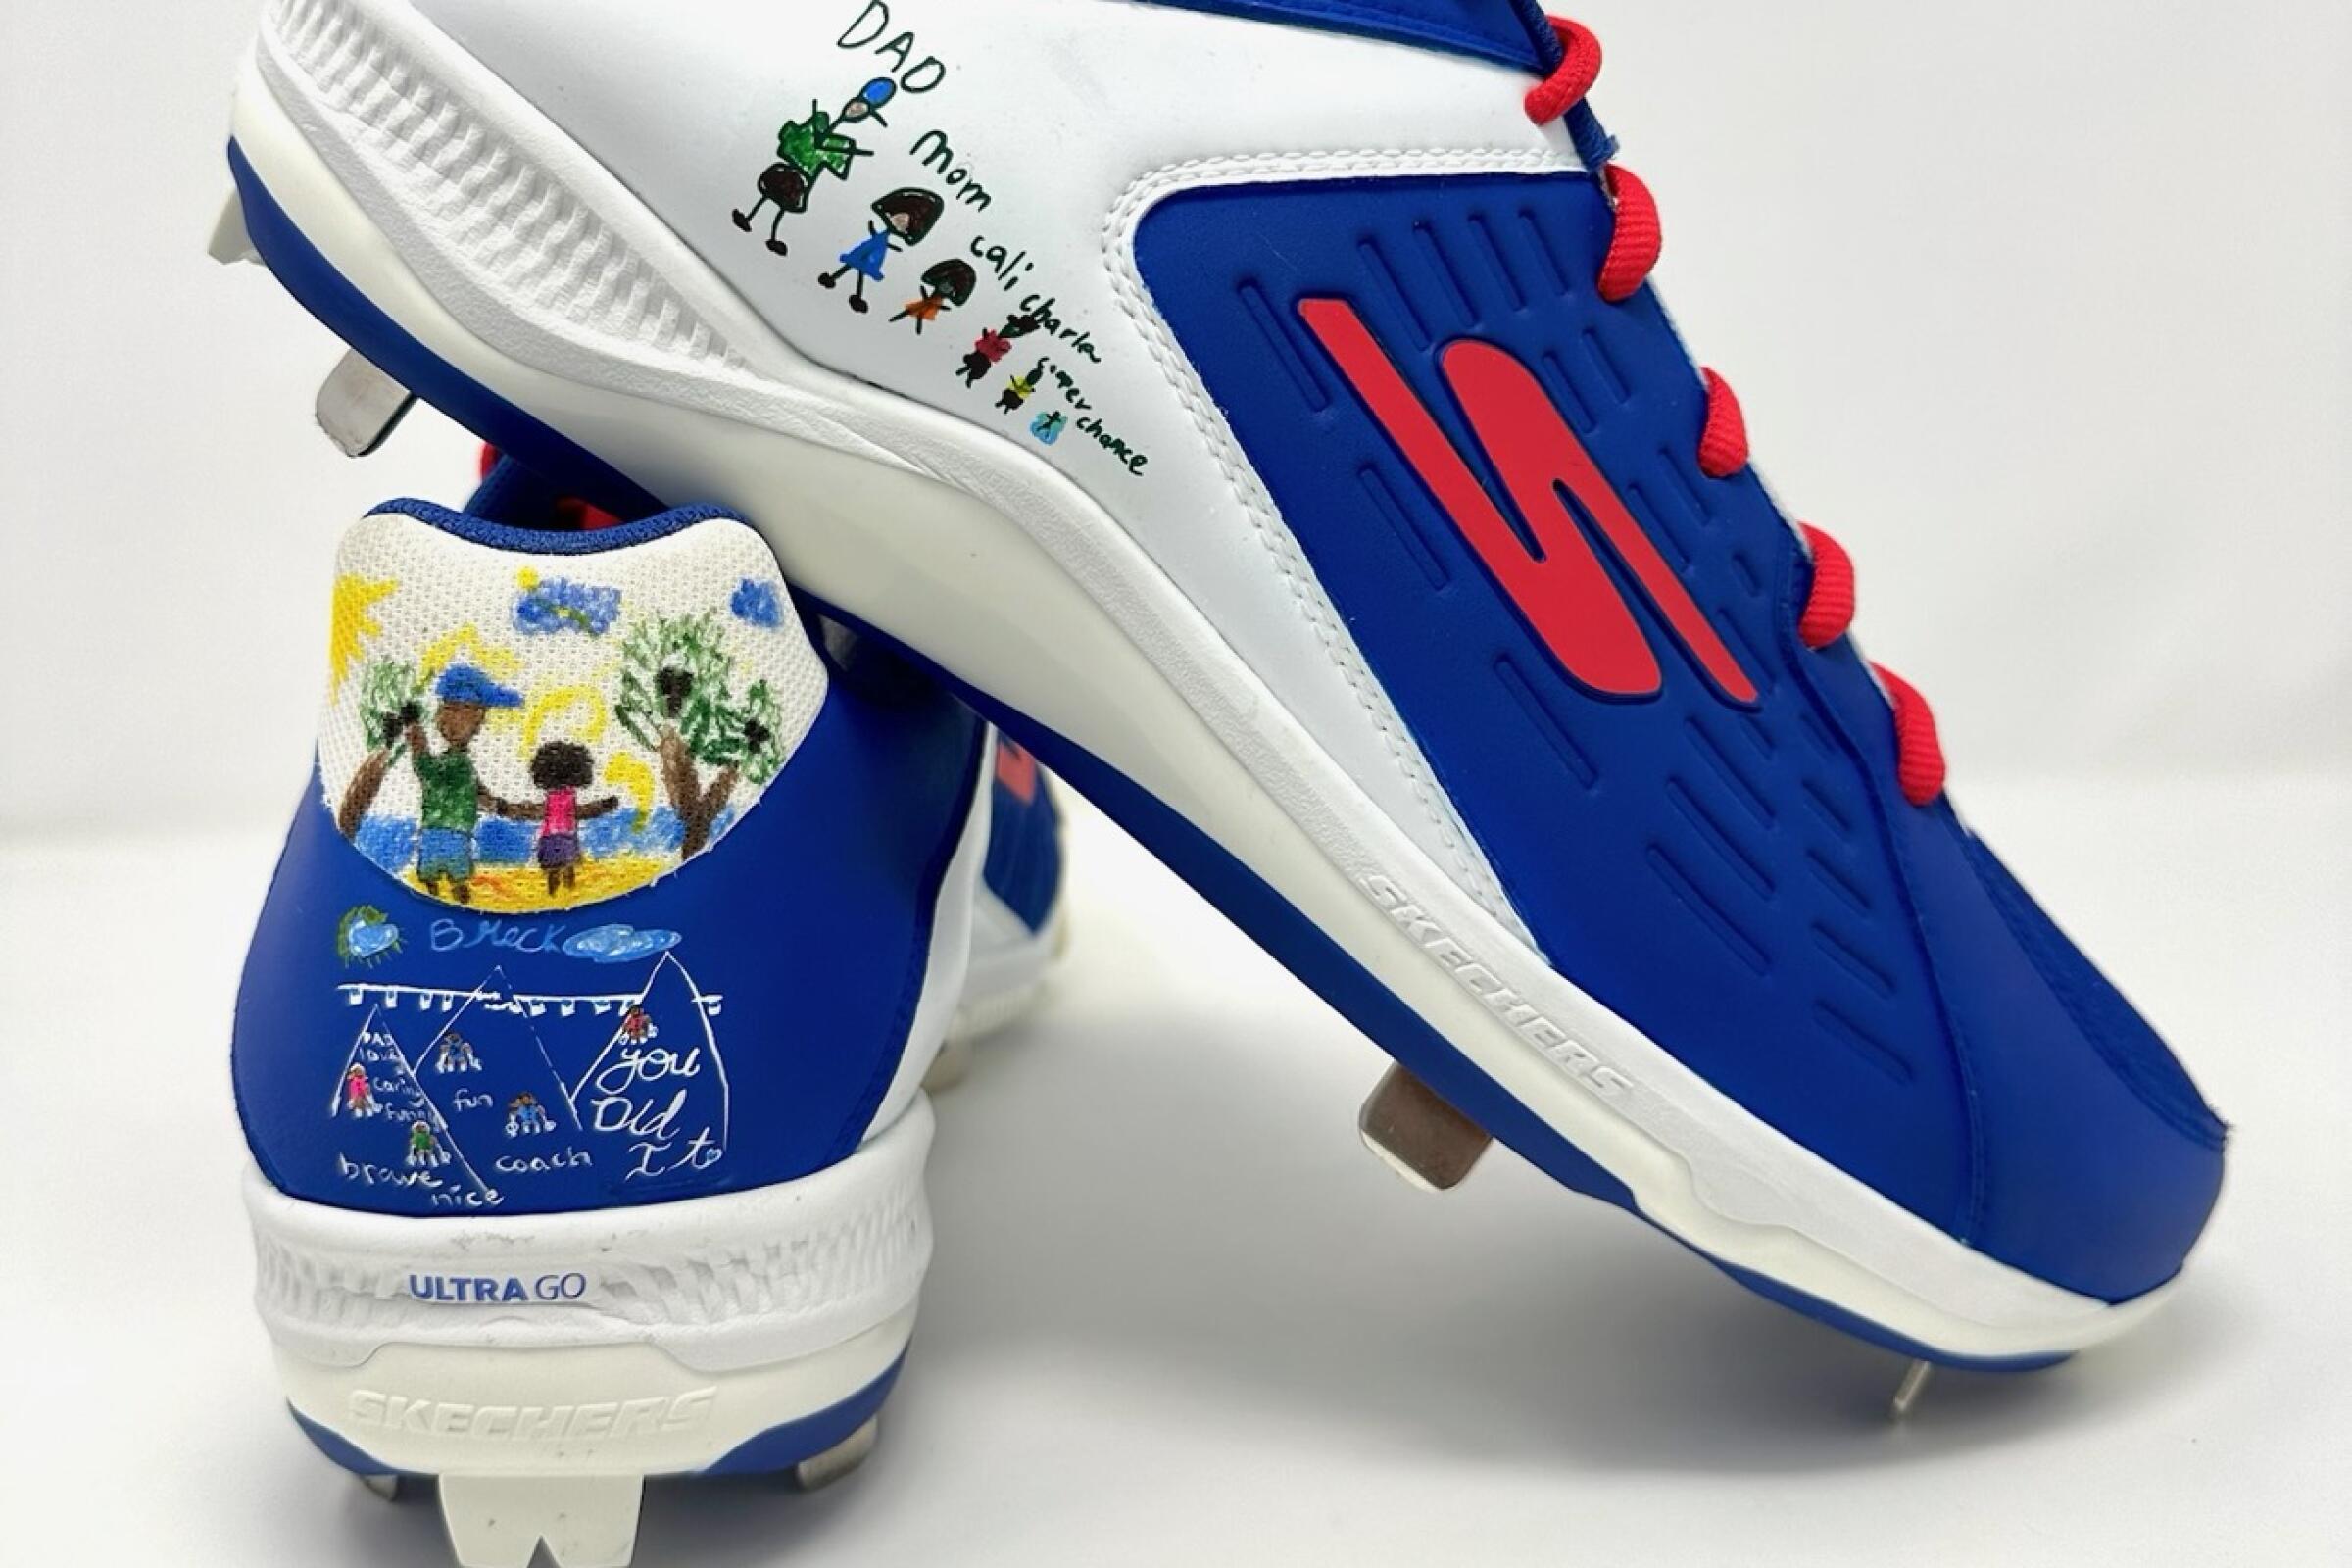 Clayton Kerhsaw's custom cleats for his return to the mound on Thursday feature drawings created by his four children.